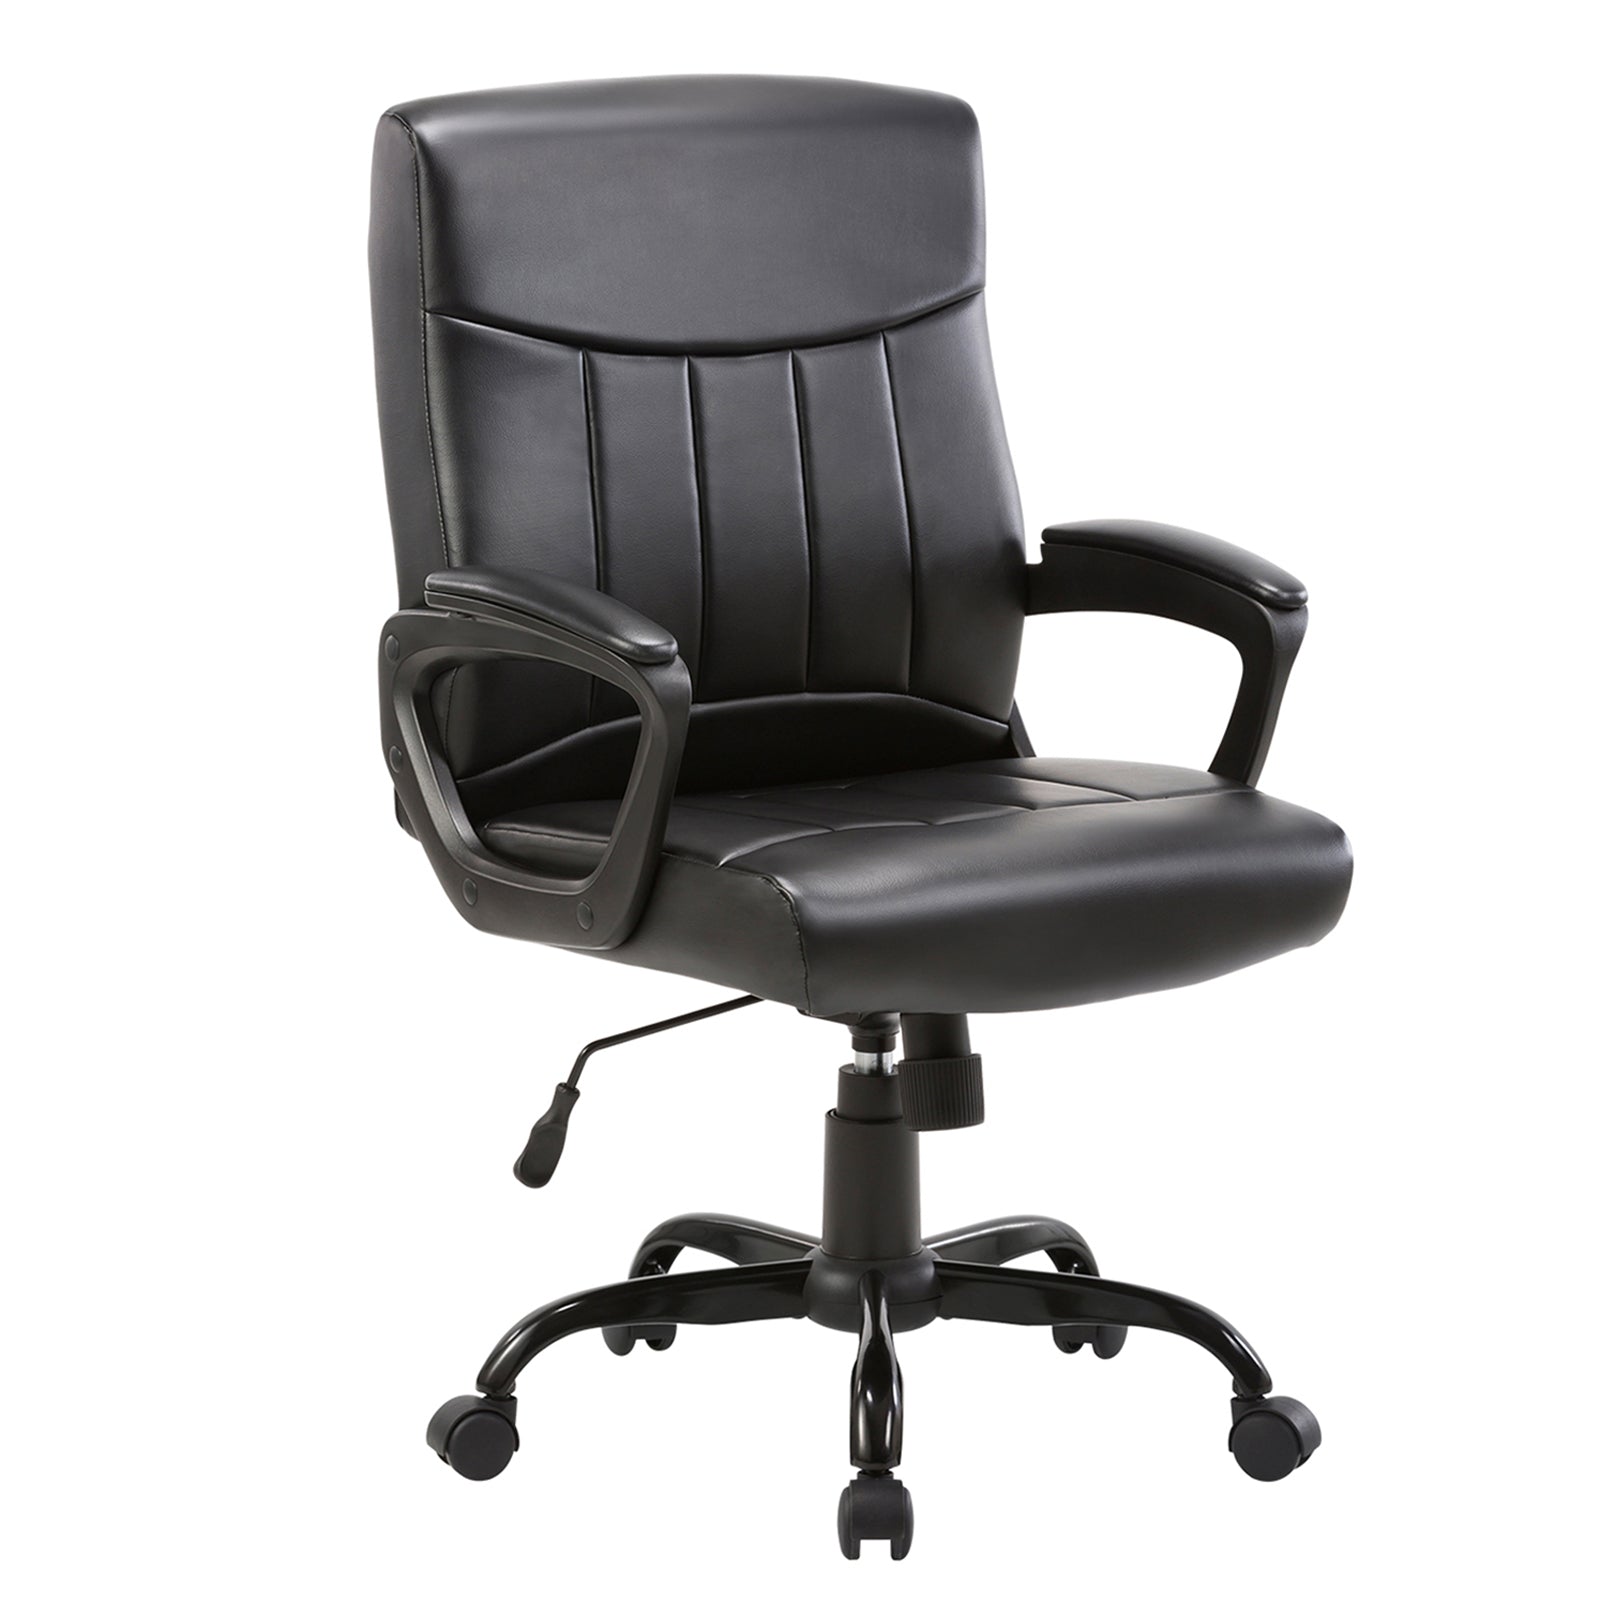 Leatherette Mid Back Leather Office Chair at Rs 3000 in Ganaur